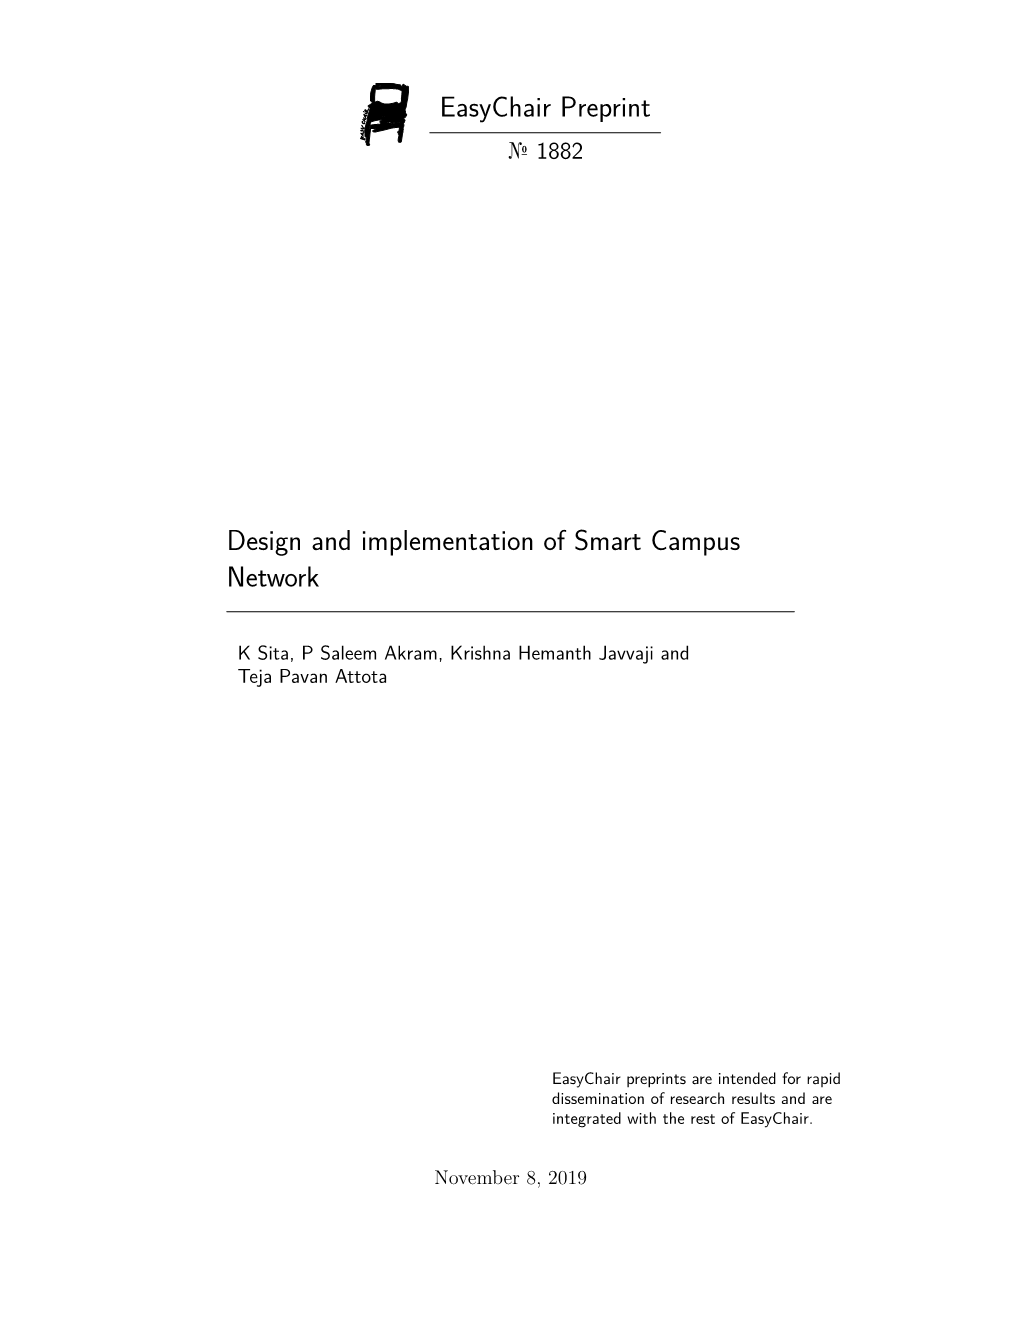 Design and Implementation of Smart Campus Network